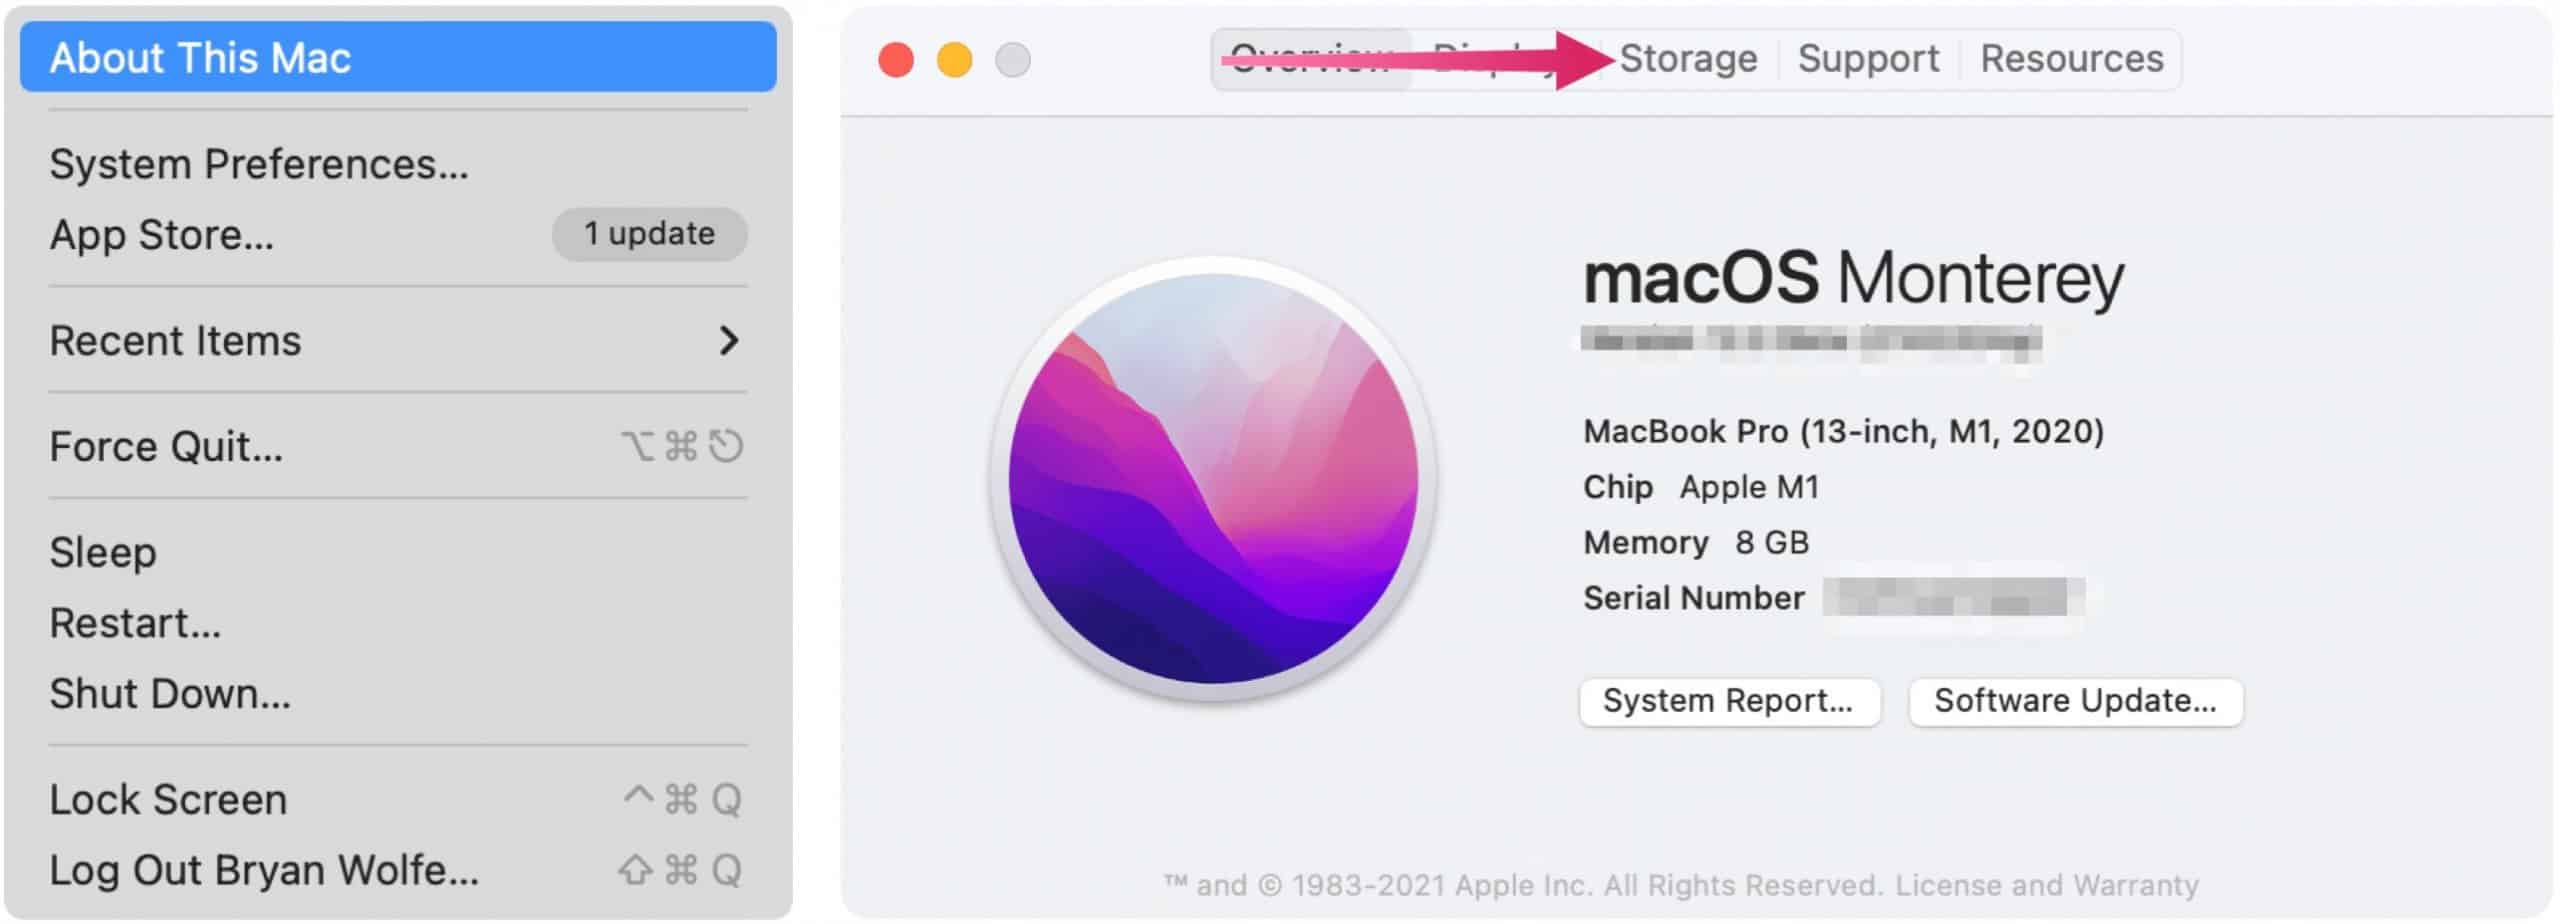 Free Up Storage about this Mac